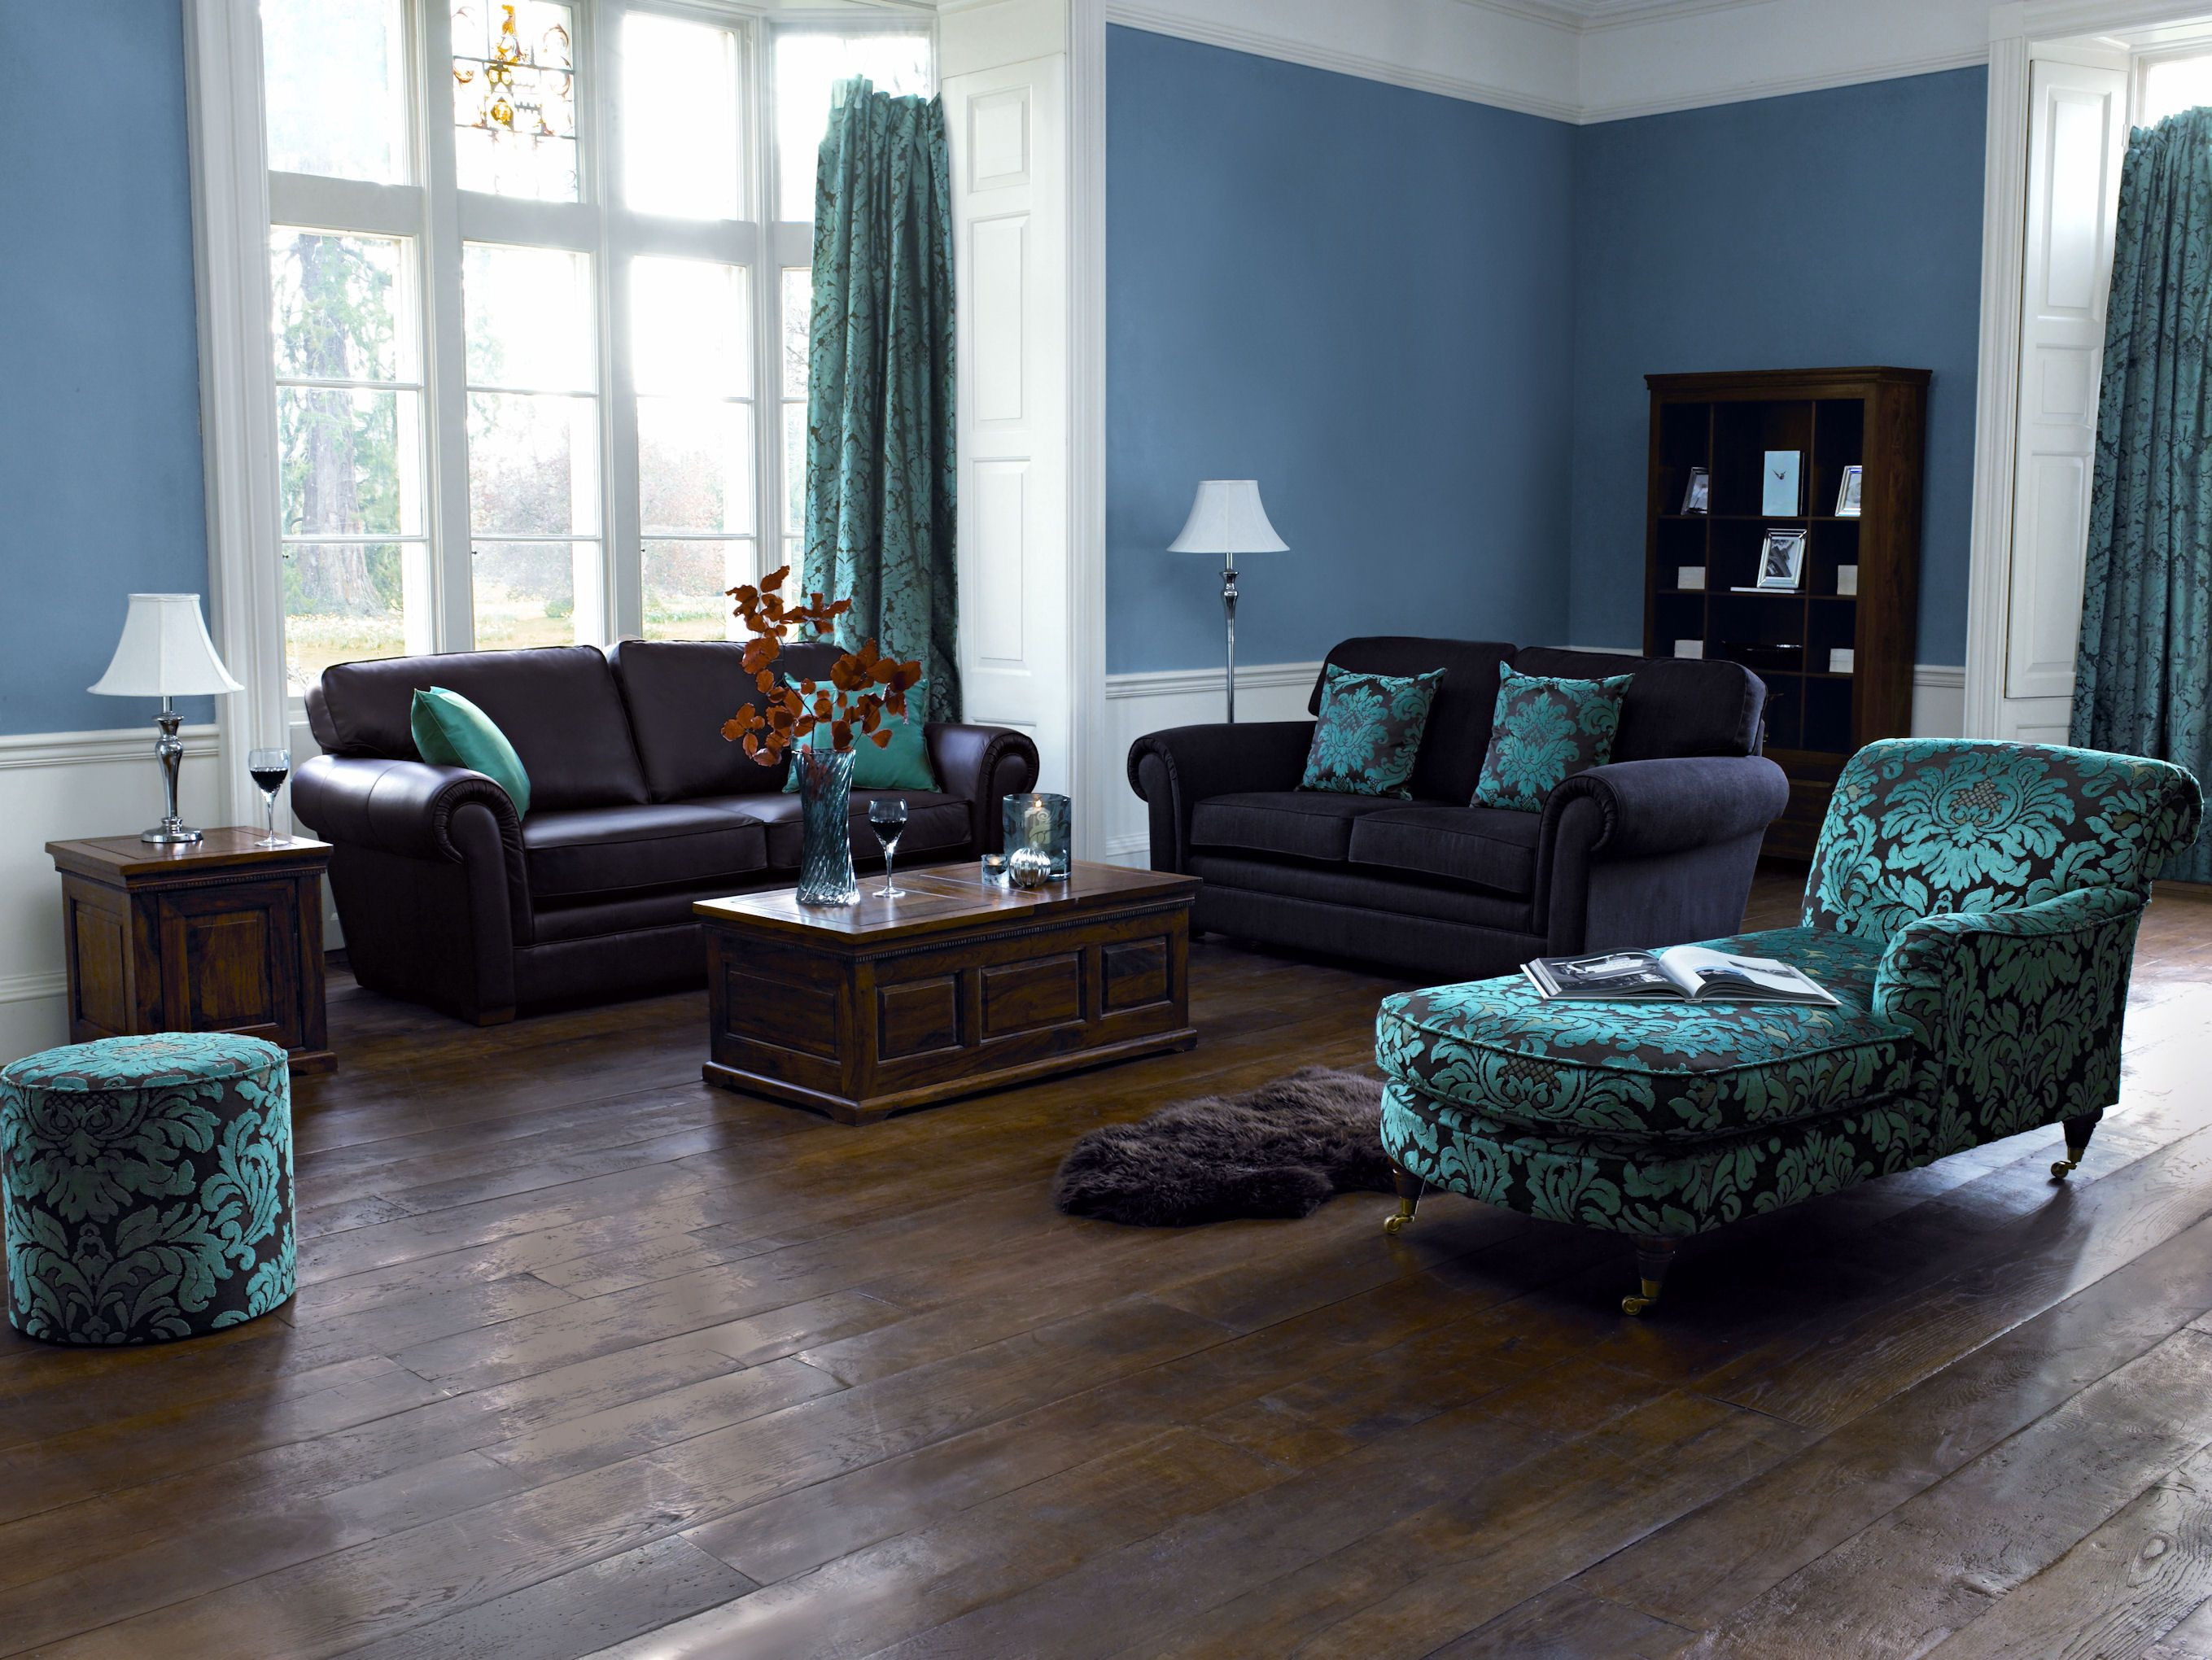 12 attractive Two tone Hardwood Floor Ideas 2024 free download two tone hardwood floor ideas of dark wood floor living room ideas hardwood floors floor inside dark wood floor living room ideas blue paint color ideas for living room with dark furniture